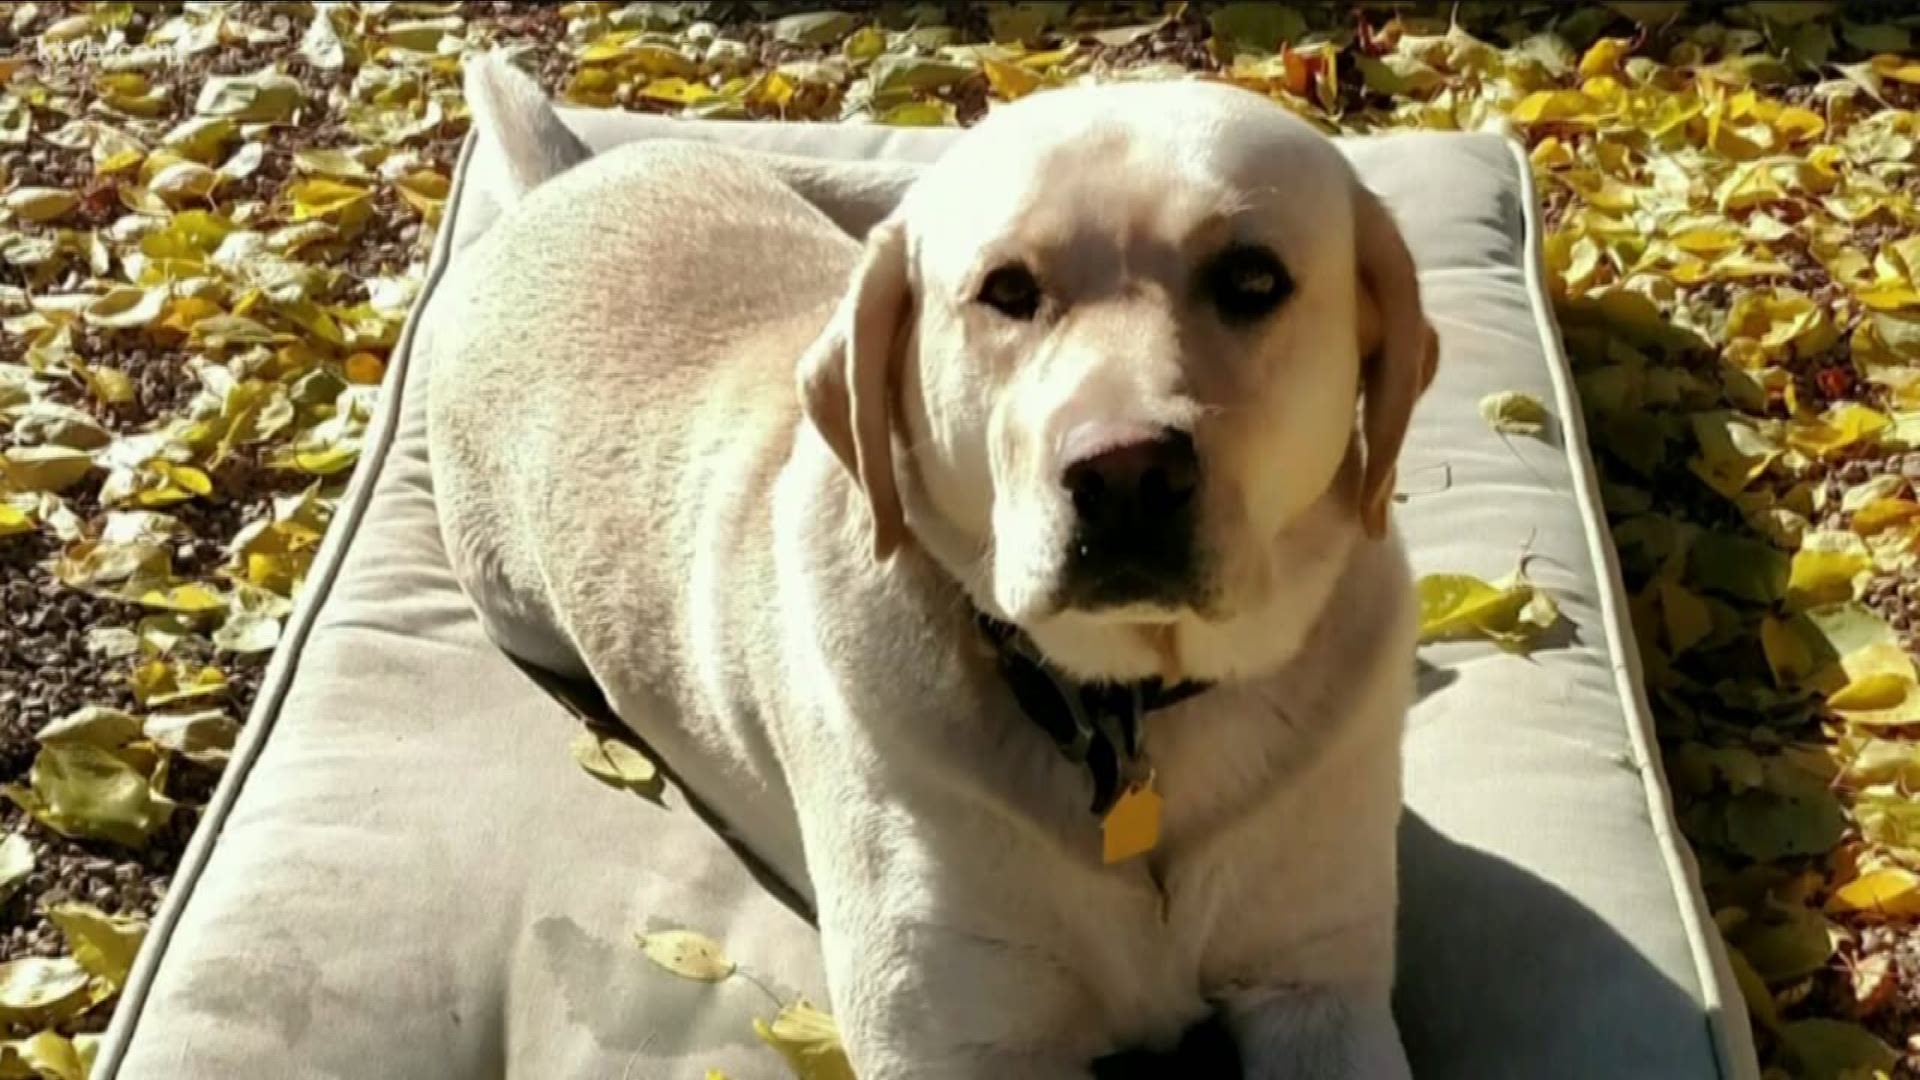 Huck, a 3-year-old yellow Labrador, was thrown from the cab of a pickup that crashed near the Gowen Road exit, and has been missing since June 8.